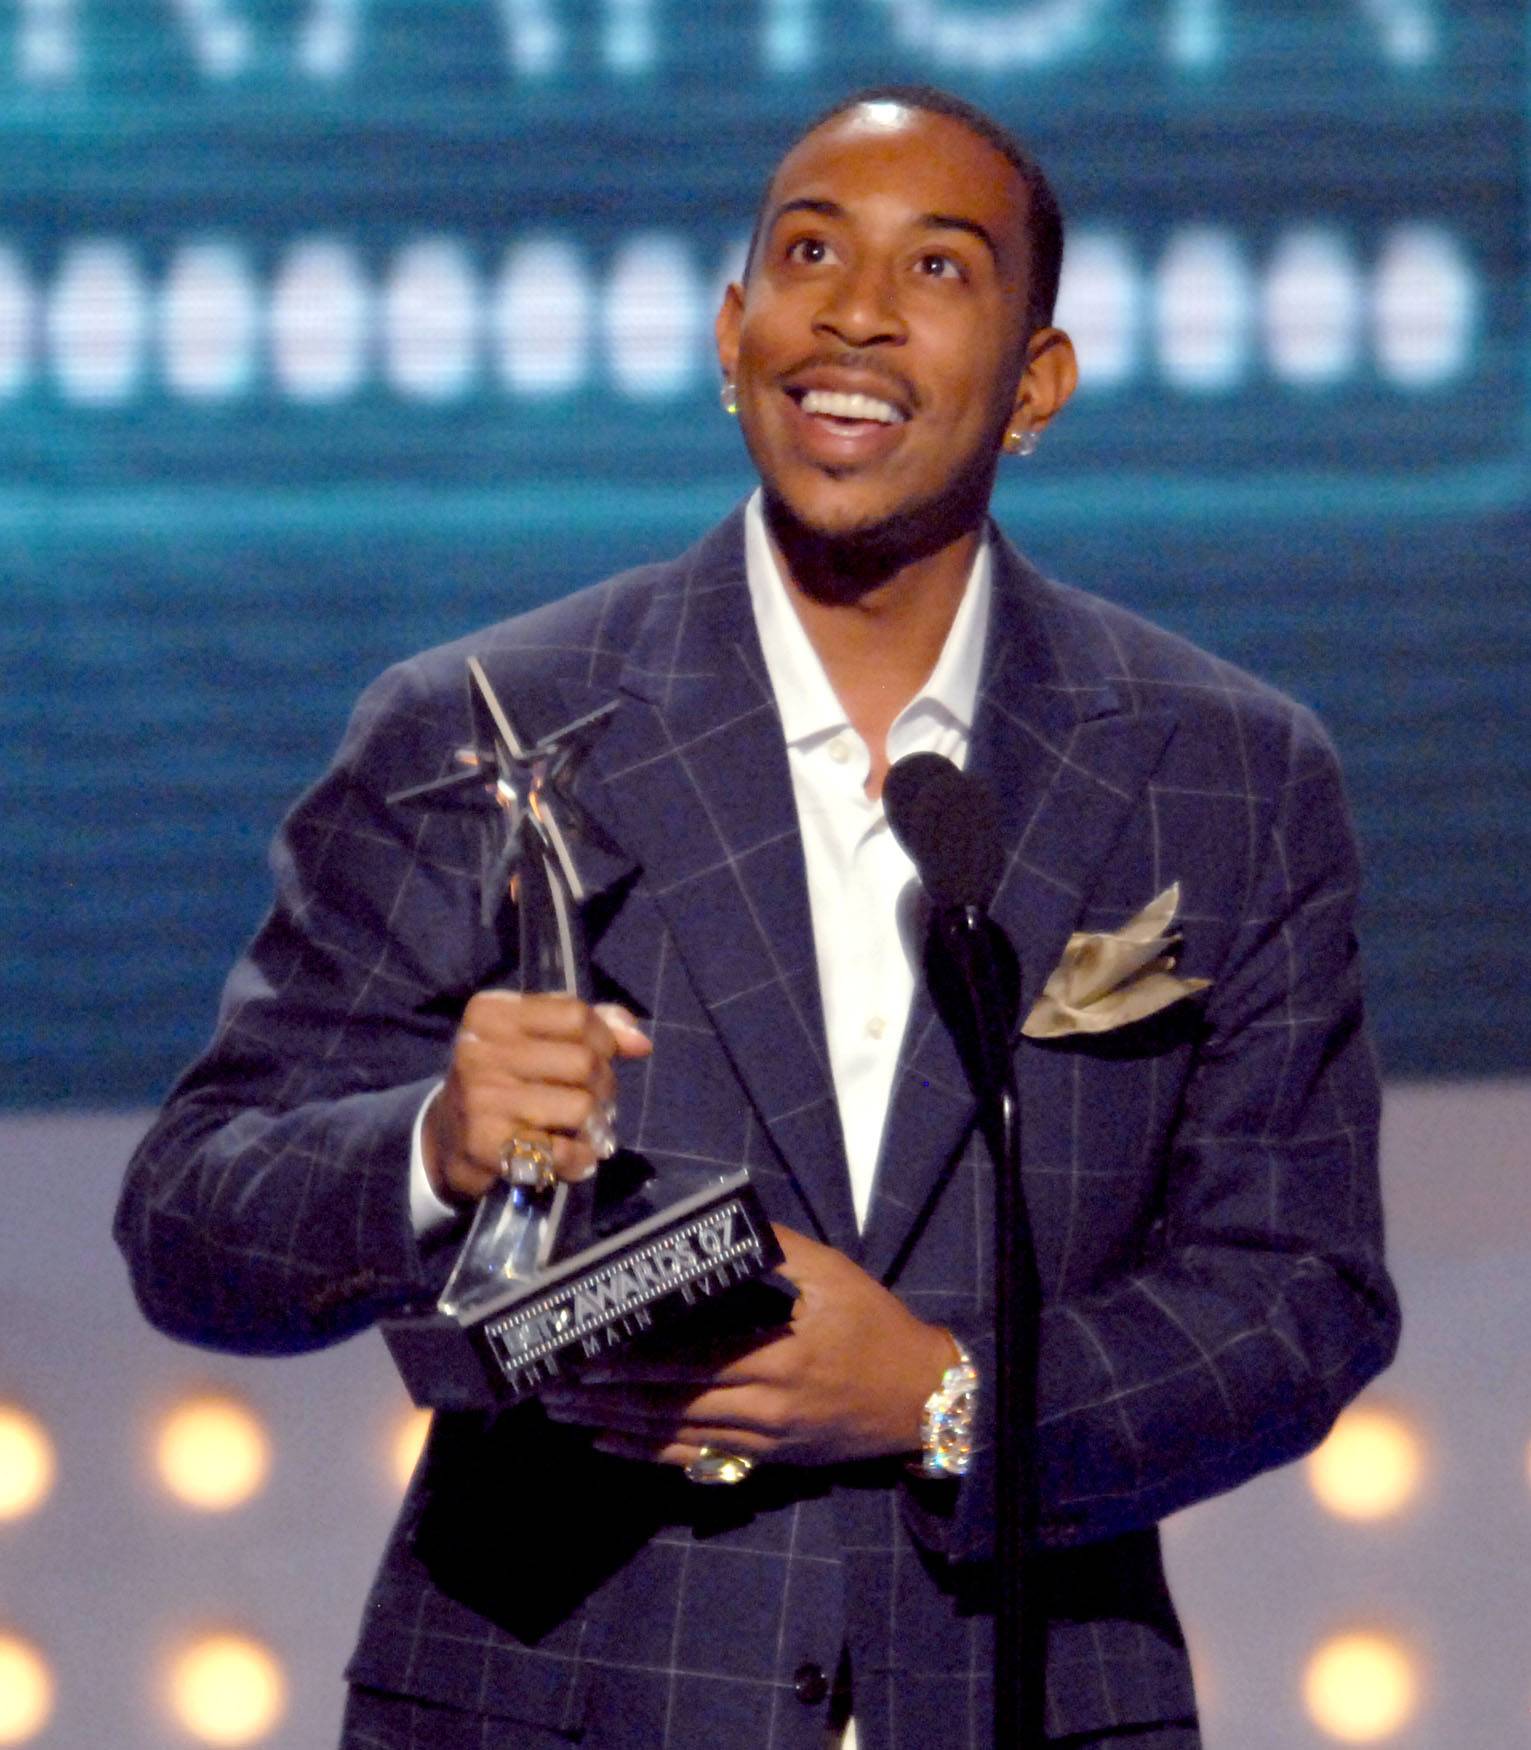 Ludacris - The Southern rapper accepts the Best Collaboration award for &quot;Runaway Love&quot; featuring Mary J. Blige at the Shrine Auditorium on June 26, 2007 in Los Angeles, California. &nbsp;&nbsp;(Photo: Michael Caulfield/WireImage for BET Network)